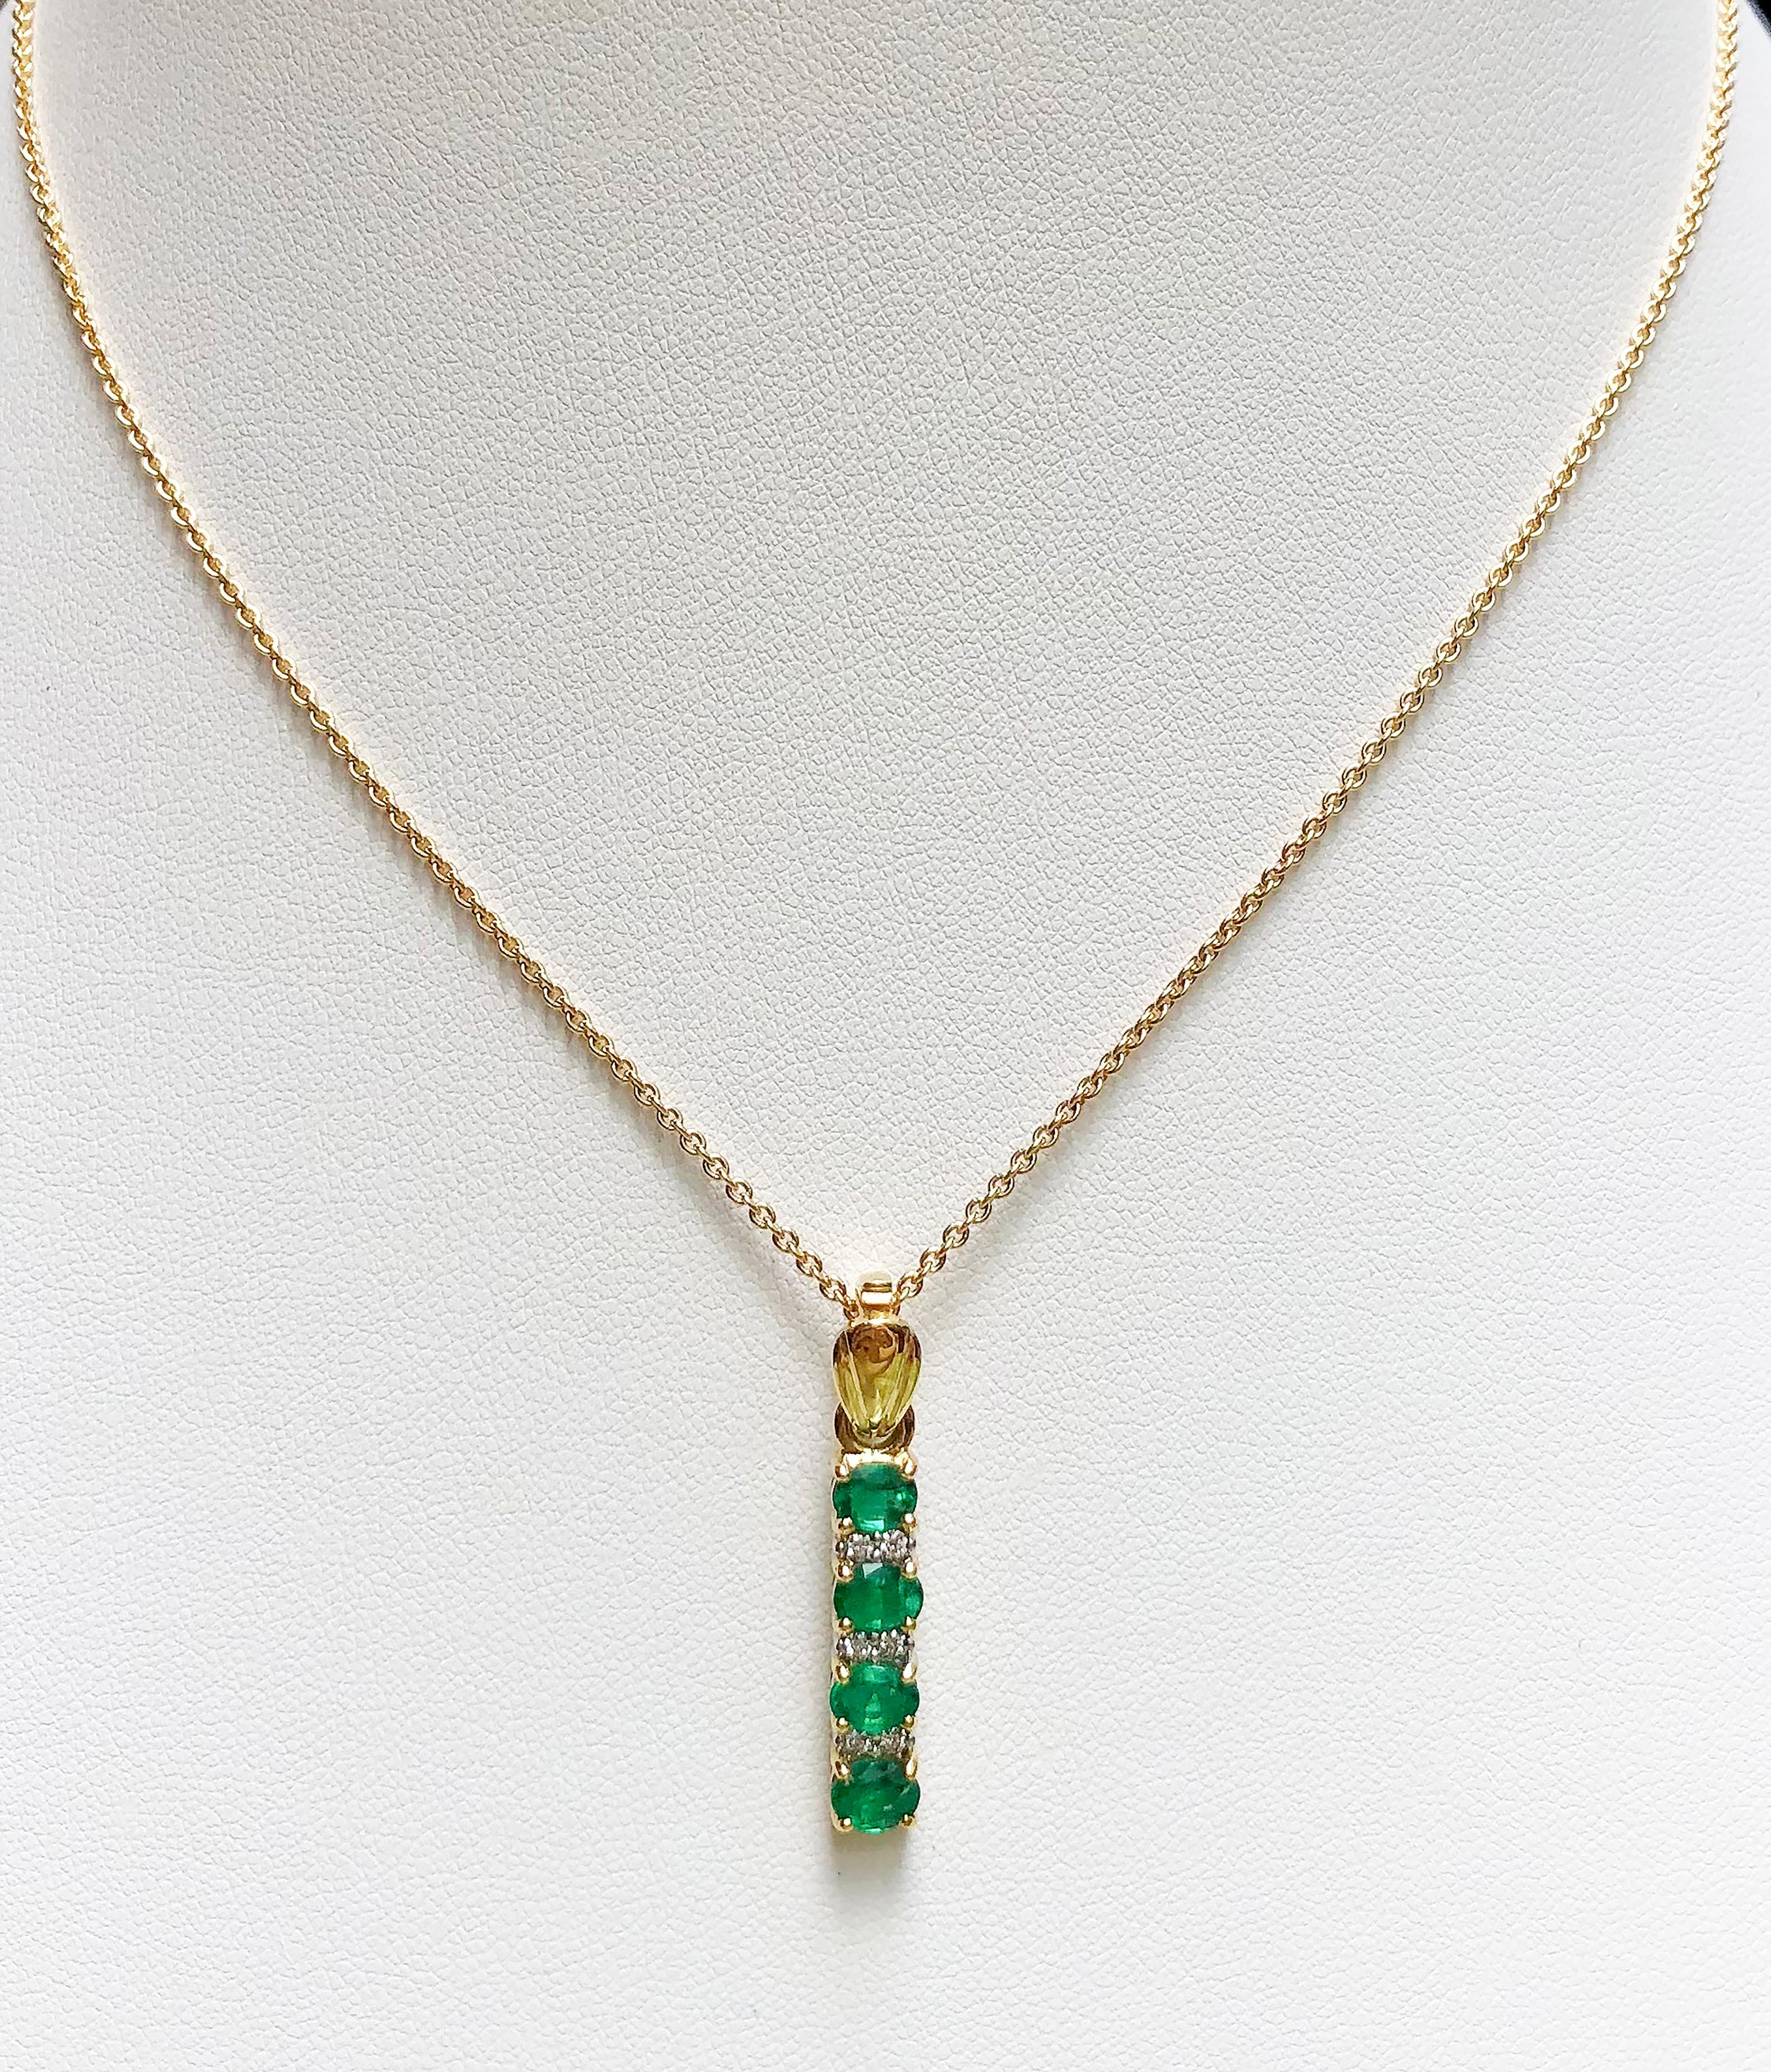 Emerald 1.32 carats with Diamond 0.10 carat Pendant set in 18 Karat Gold Settings
(chain not included)

Width:  0.5 cm 
Length: 3.2 cm
Total Weight: 3.82 grams

